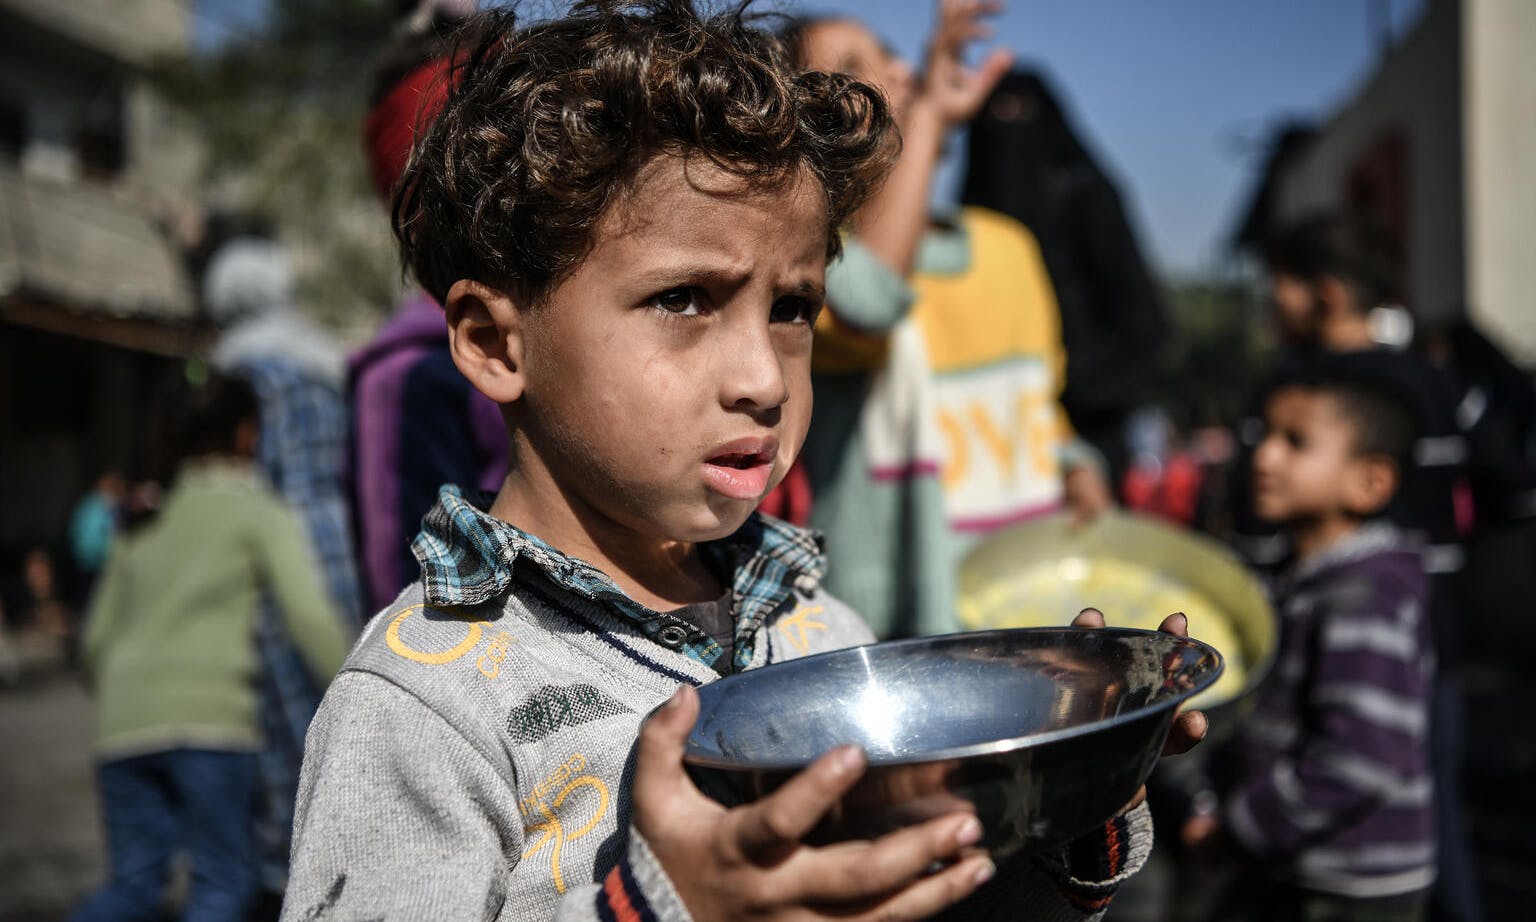 Ahmad, 5-years-old, waits his turn in the crowd to get a meal from a charitable hospice that distributes free food in the city of Rafah, southern the Gaza Strip. 